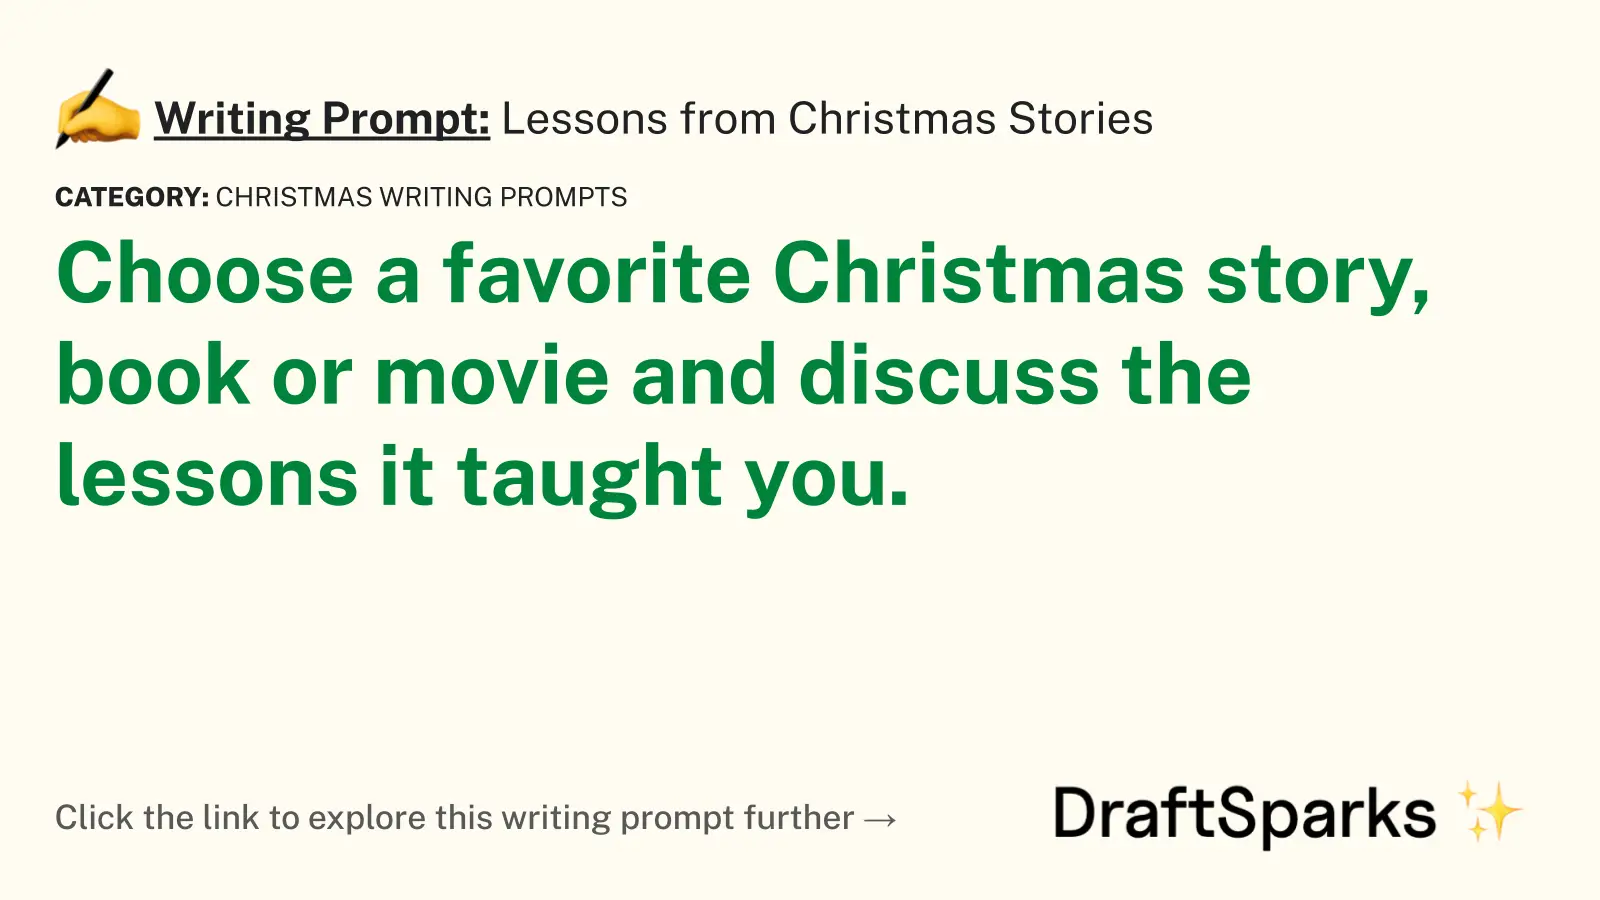 Lessons from Christmas Stories